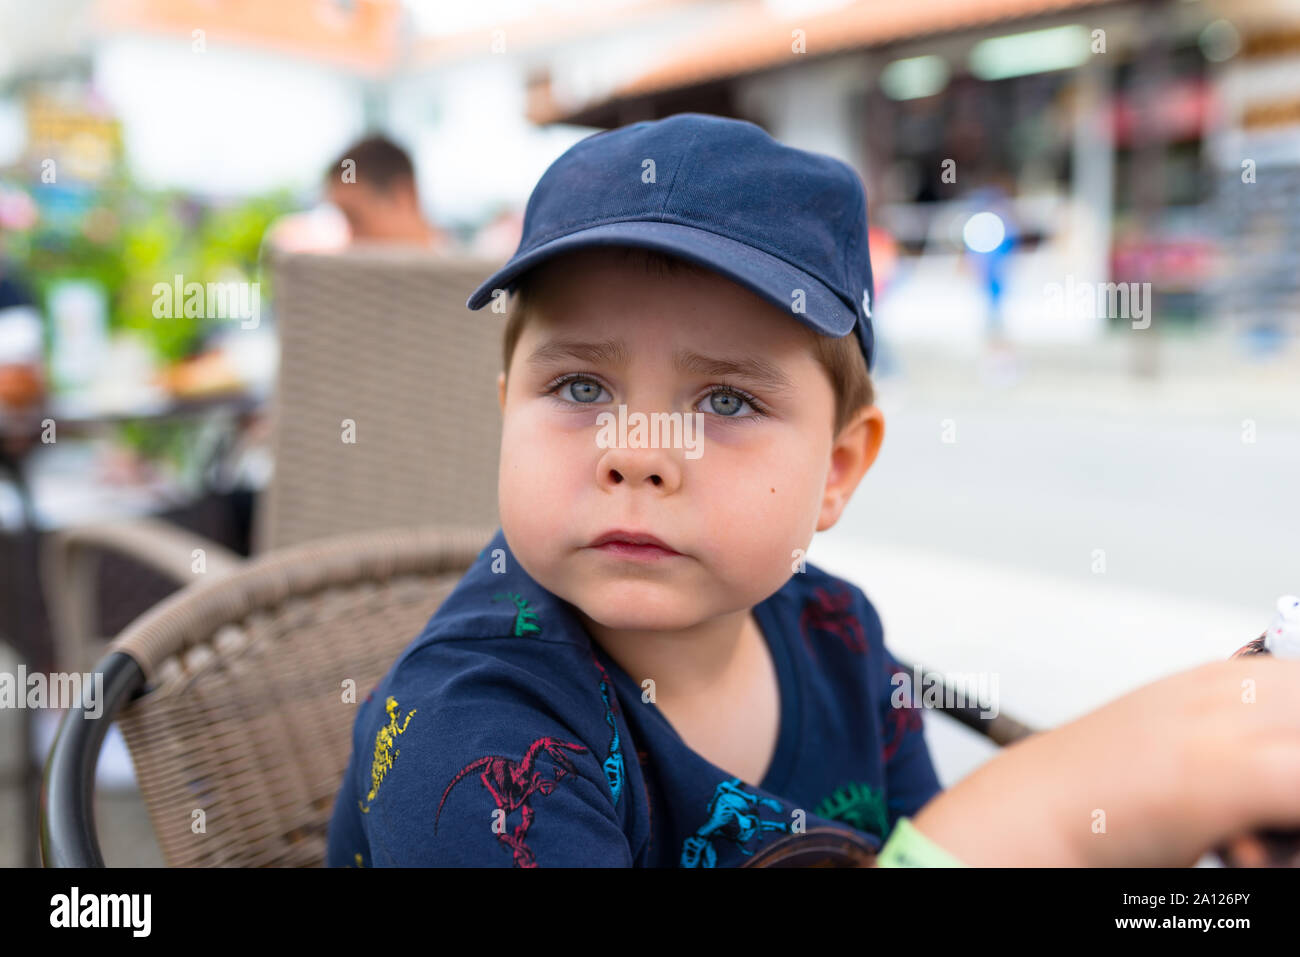 Five-year cute boy in a navy blue baseball cap sitting on a wicker chair outside in a restaurant. Stock Photo